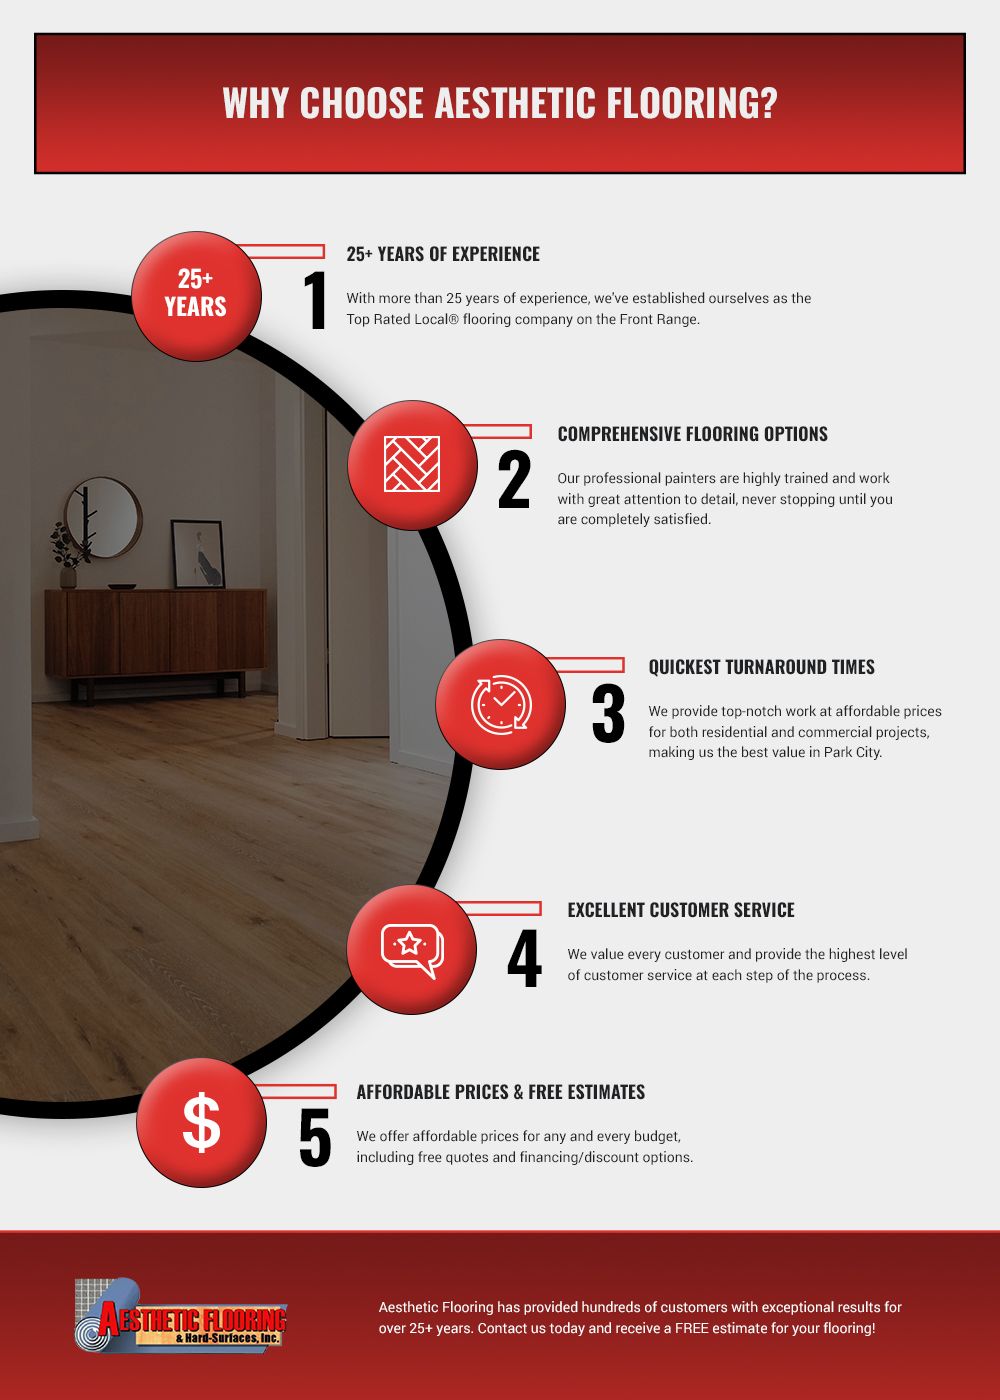 Why-Choose-Aesthetic-Flooring-infographic-60a28a0f280ac.jpg